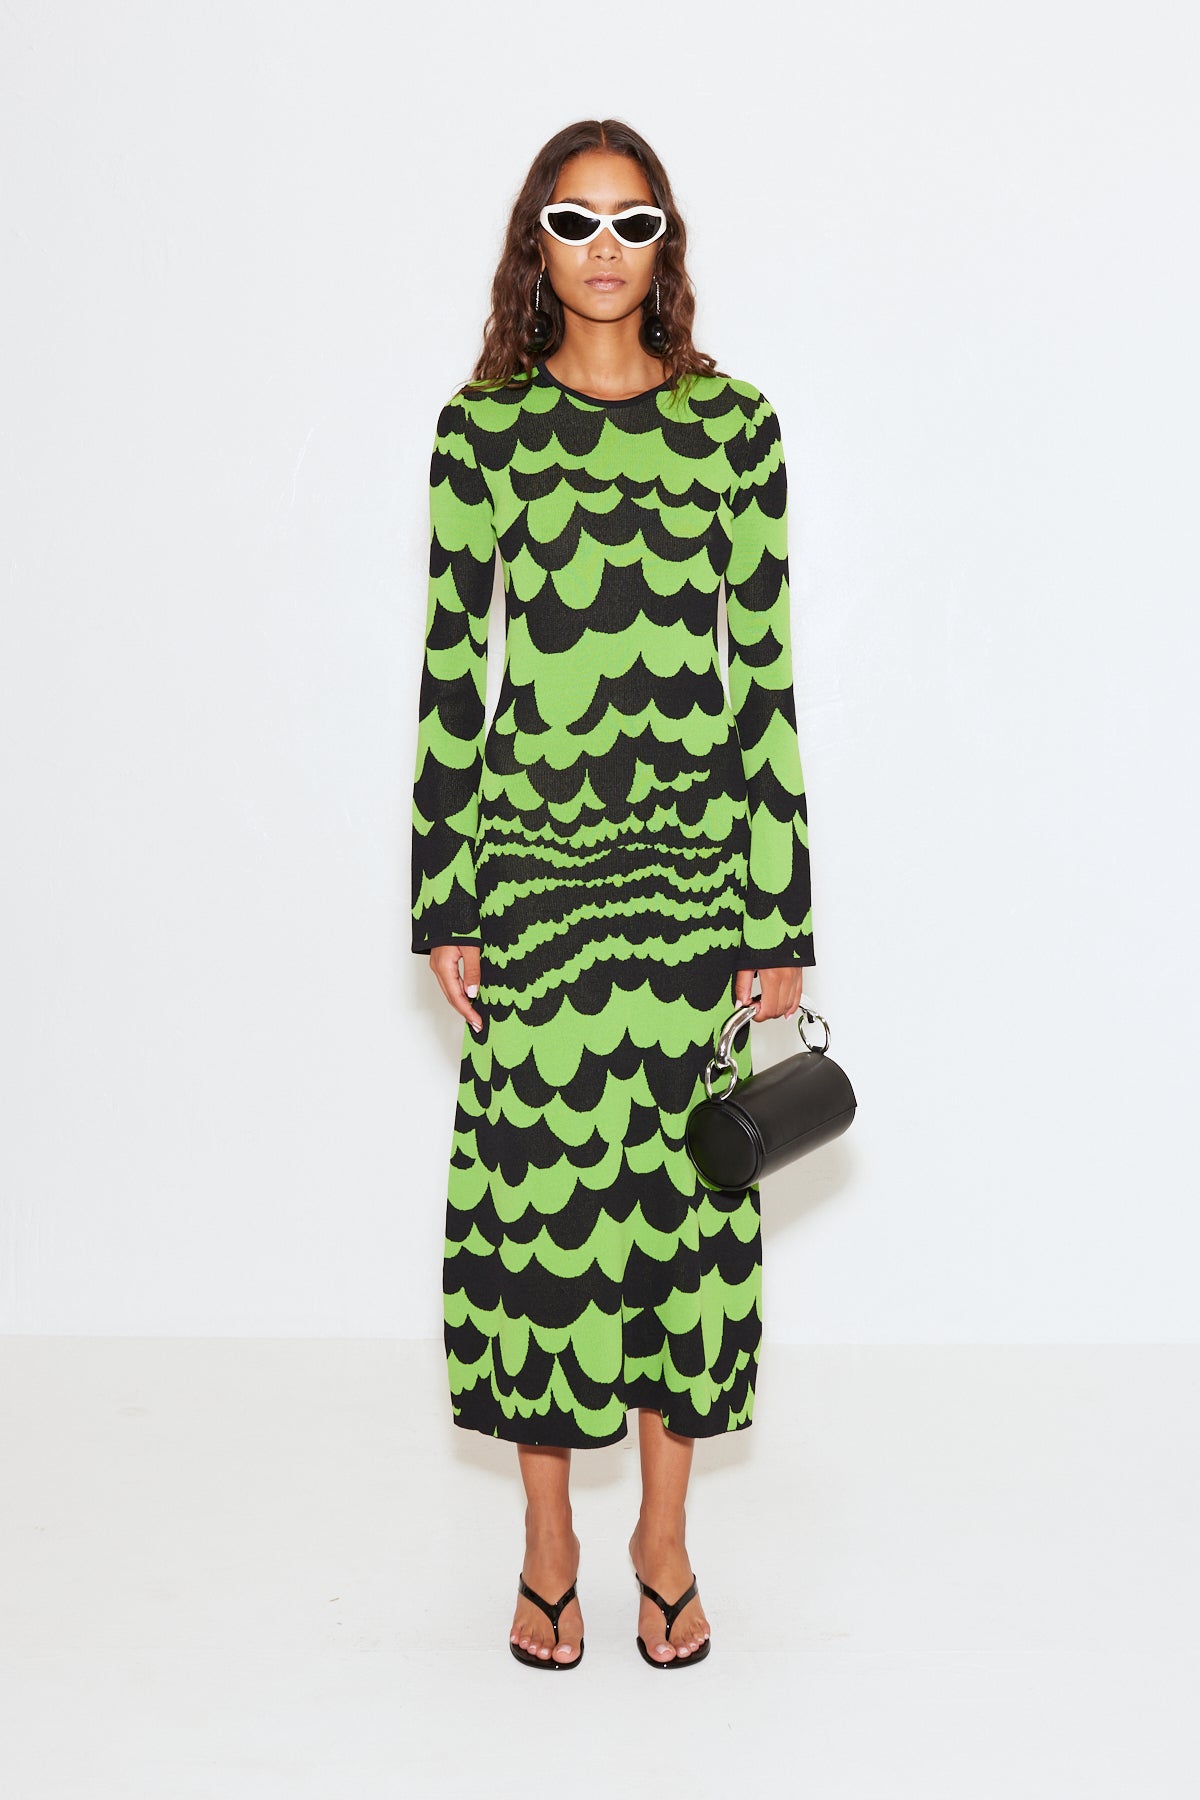 Knits By Axon Dress in Happy Sheep